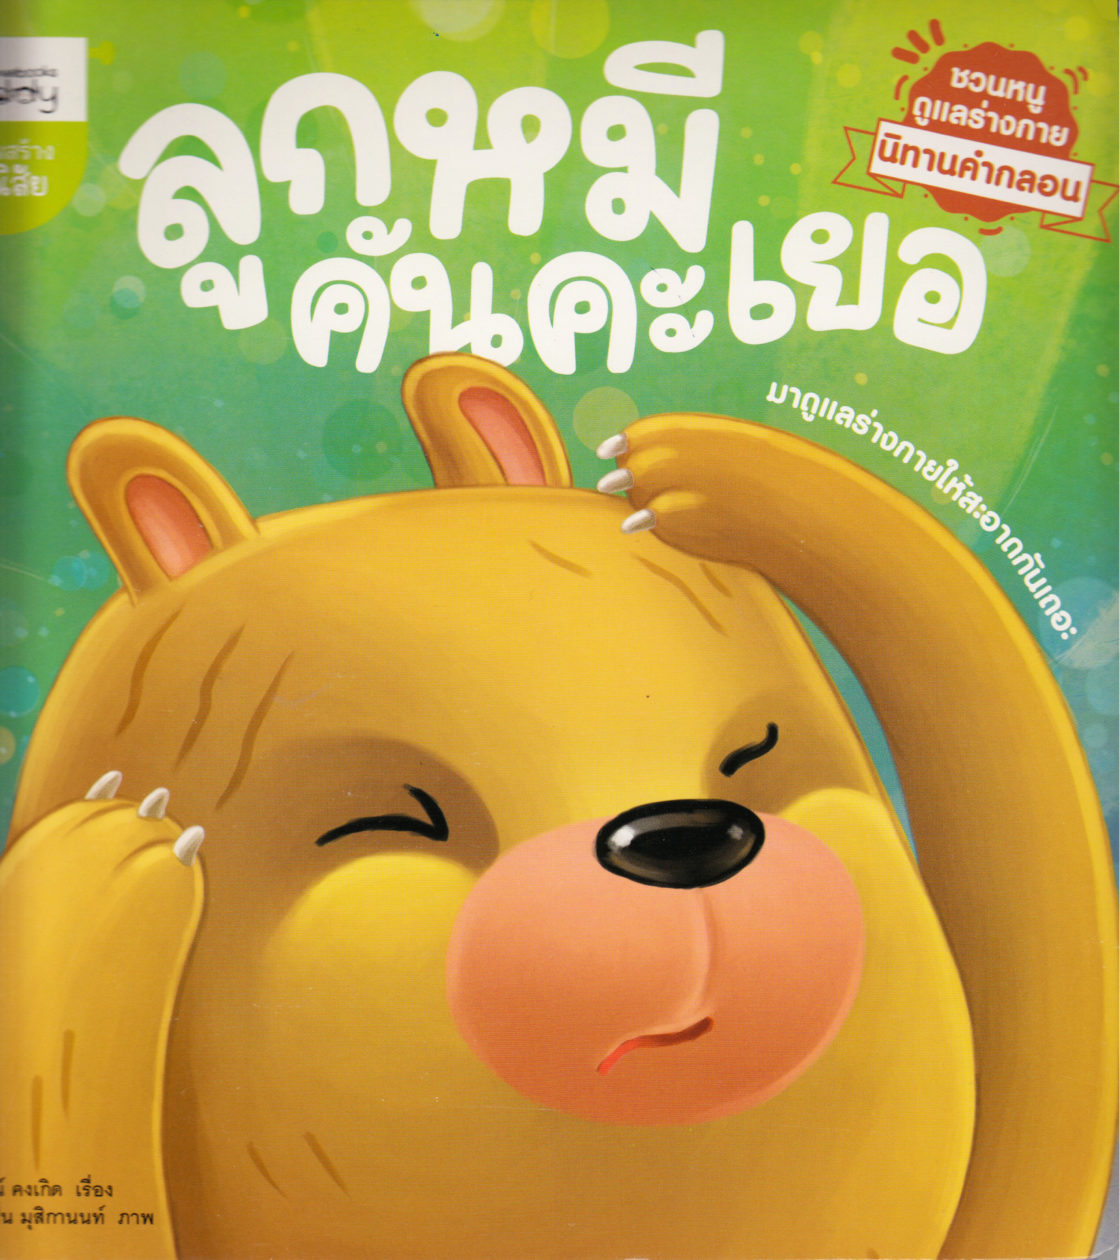 The bear itchy itchy: The story of the mouse (Thai)